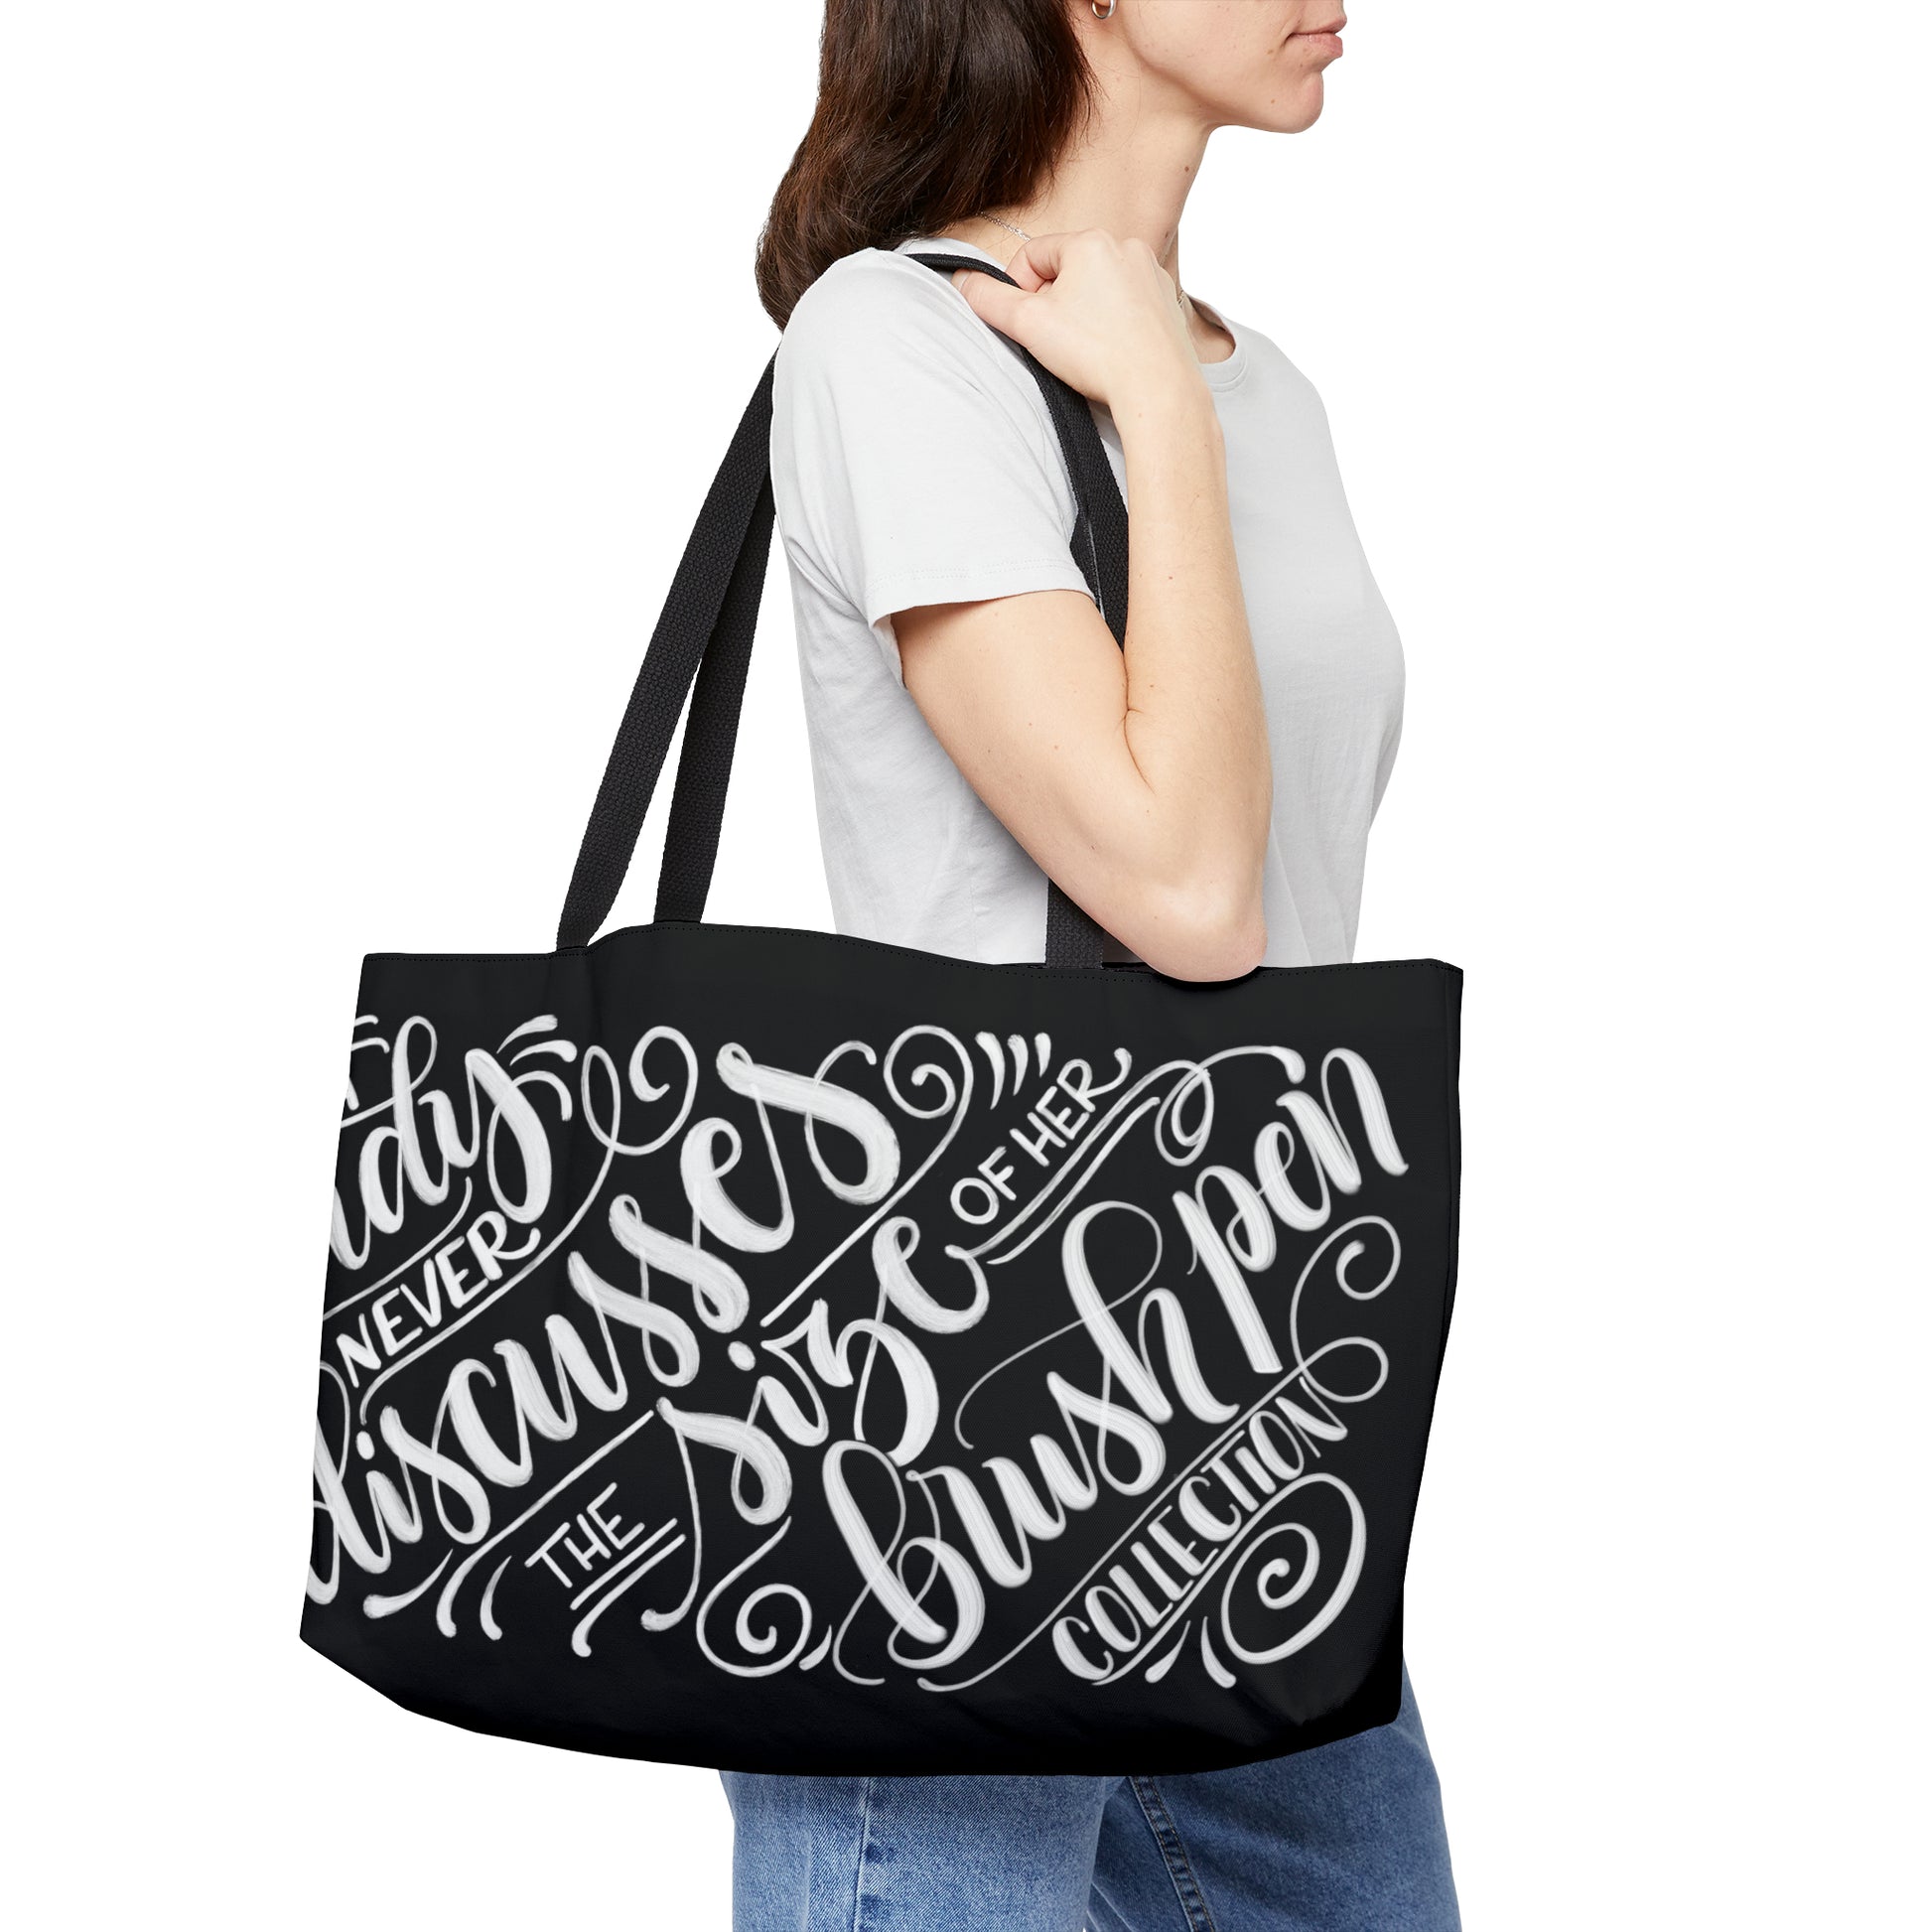 A lady never discusses the size of her brush pen collection - Weekender Tote Bag - howjoyfulshop